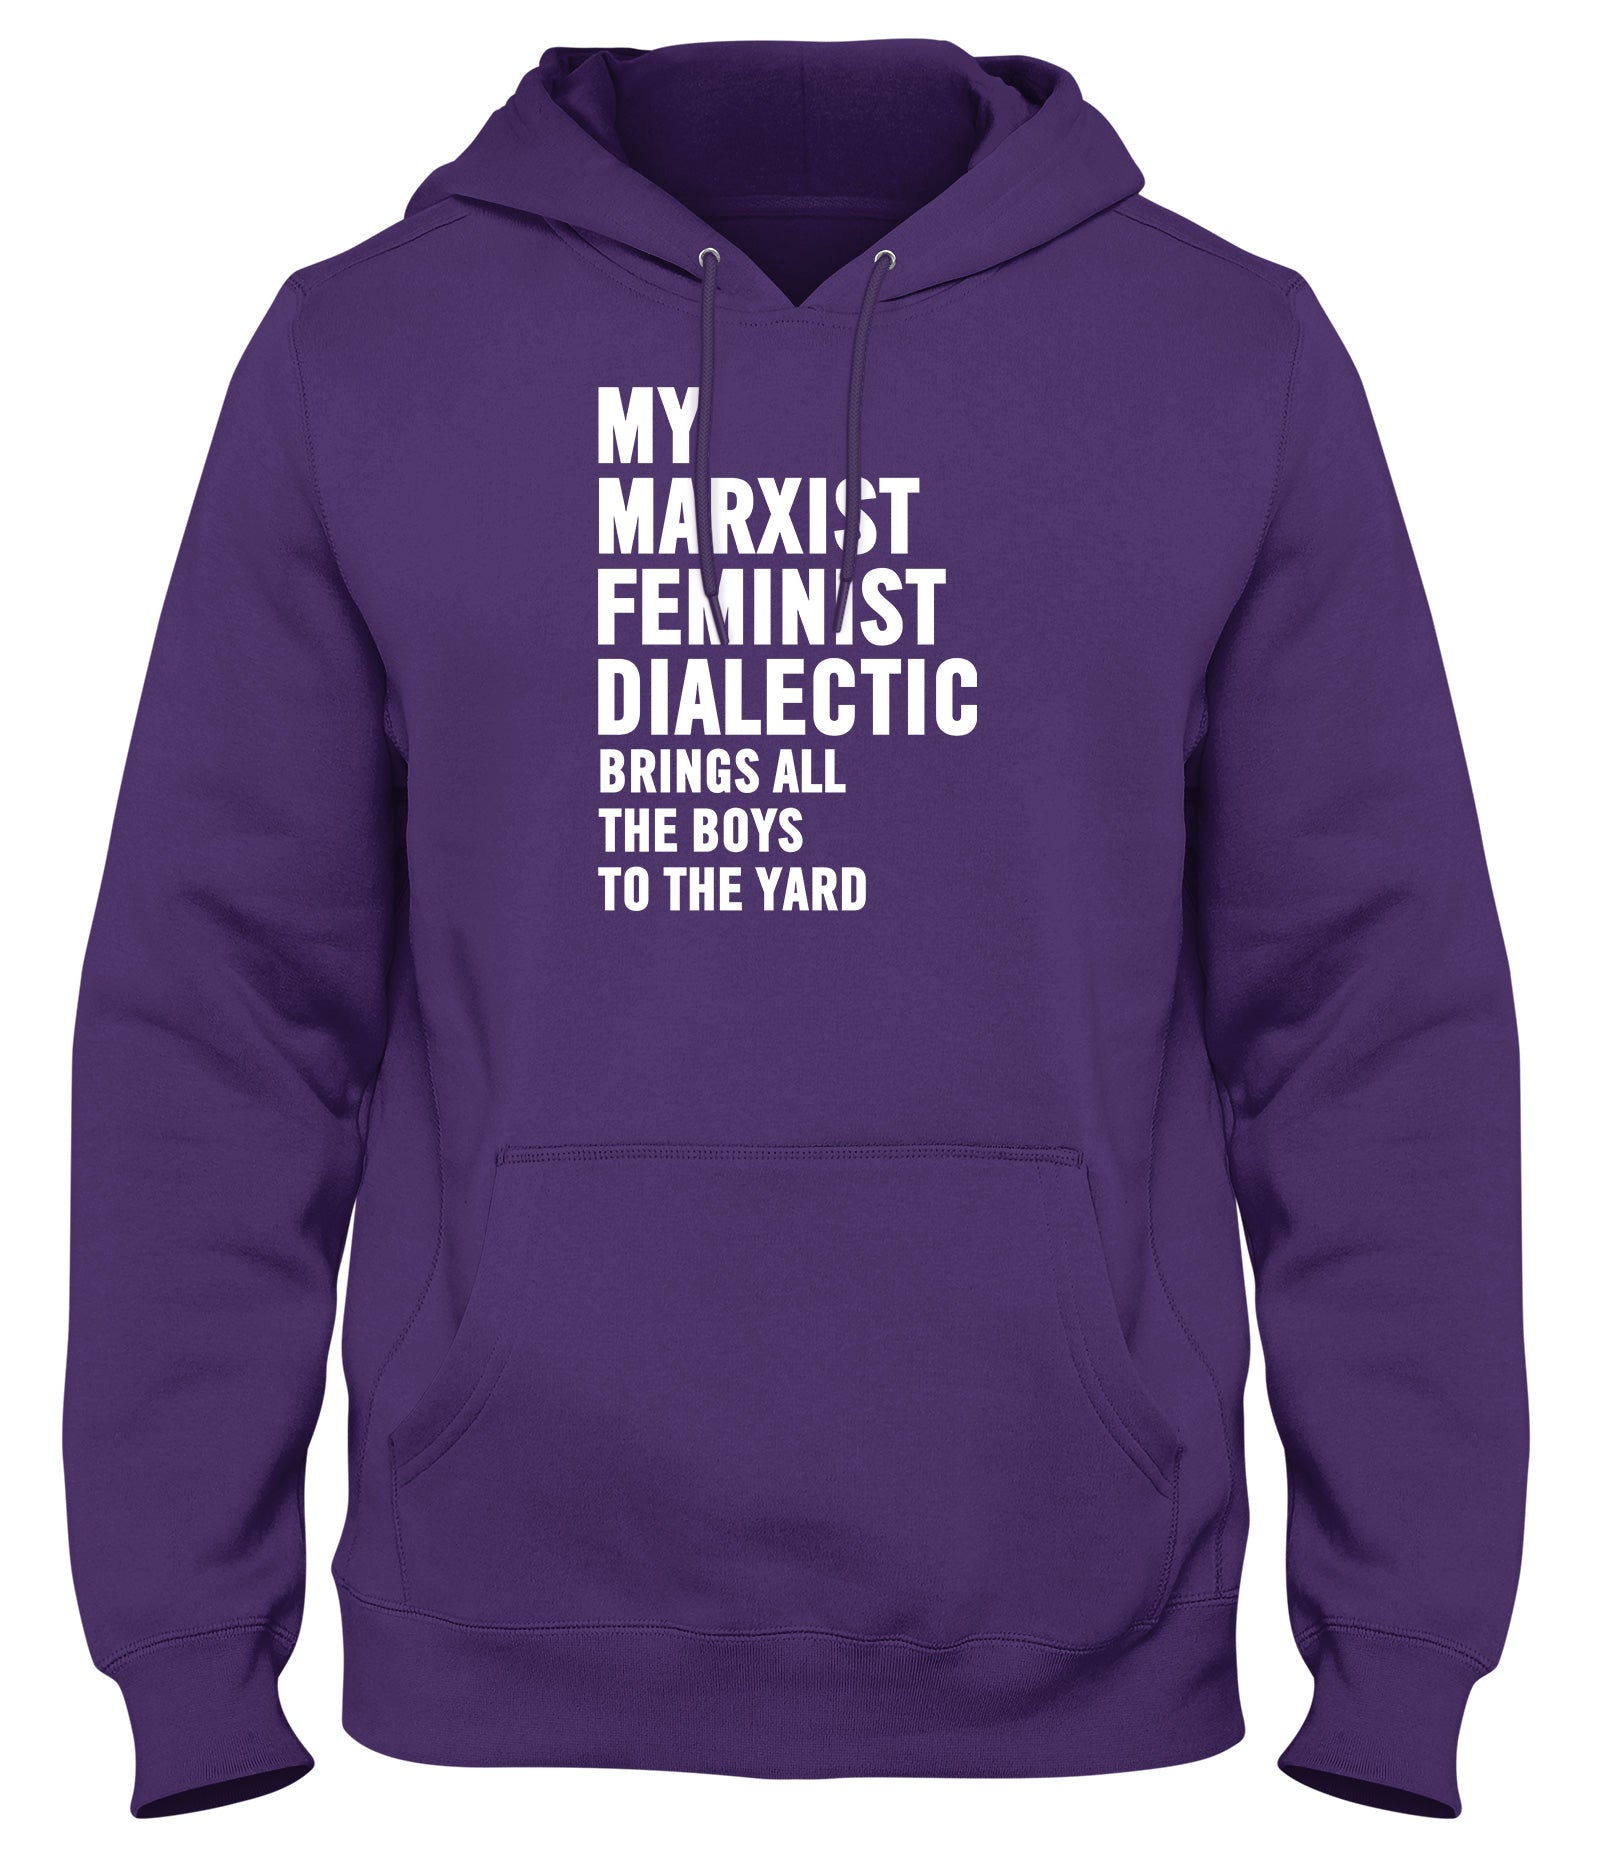 MY MARXIST FEMINIST DIALECTIC BRINGS ALL THE BOYS TO THE YARD MENS WOMENS LADIES UNISEX FUNNY SLOGAN HOODIE